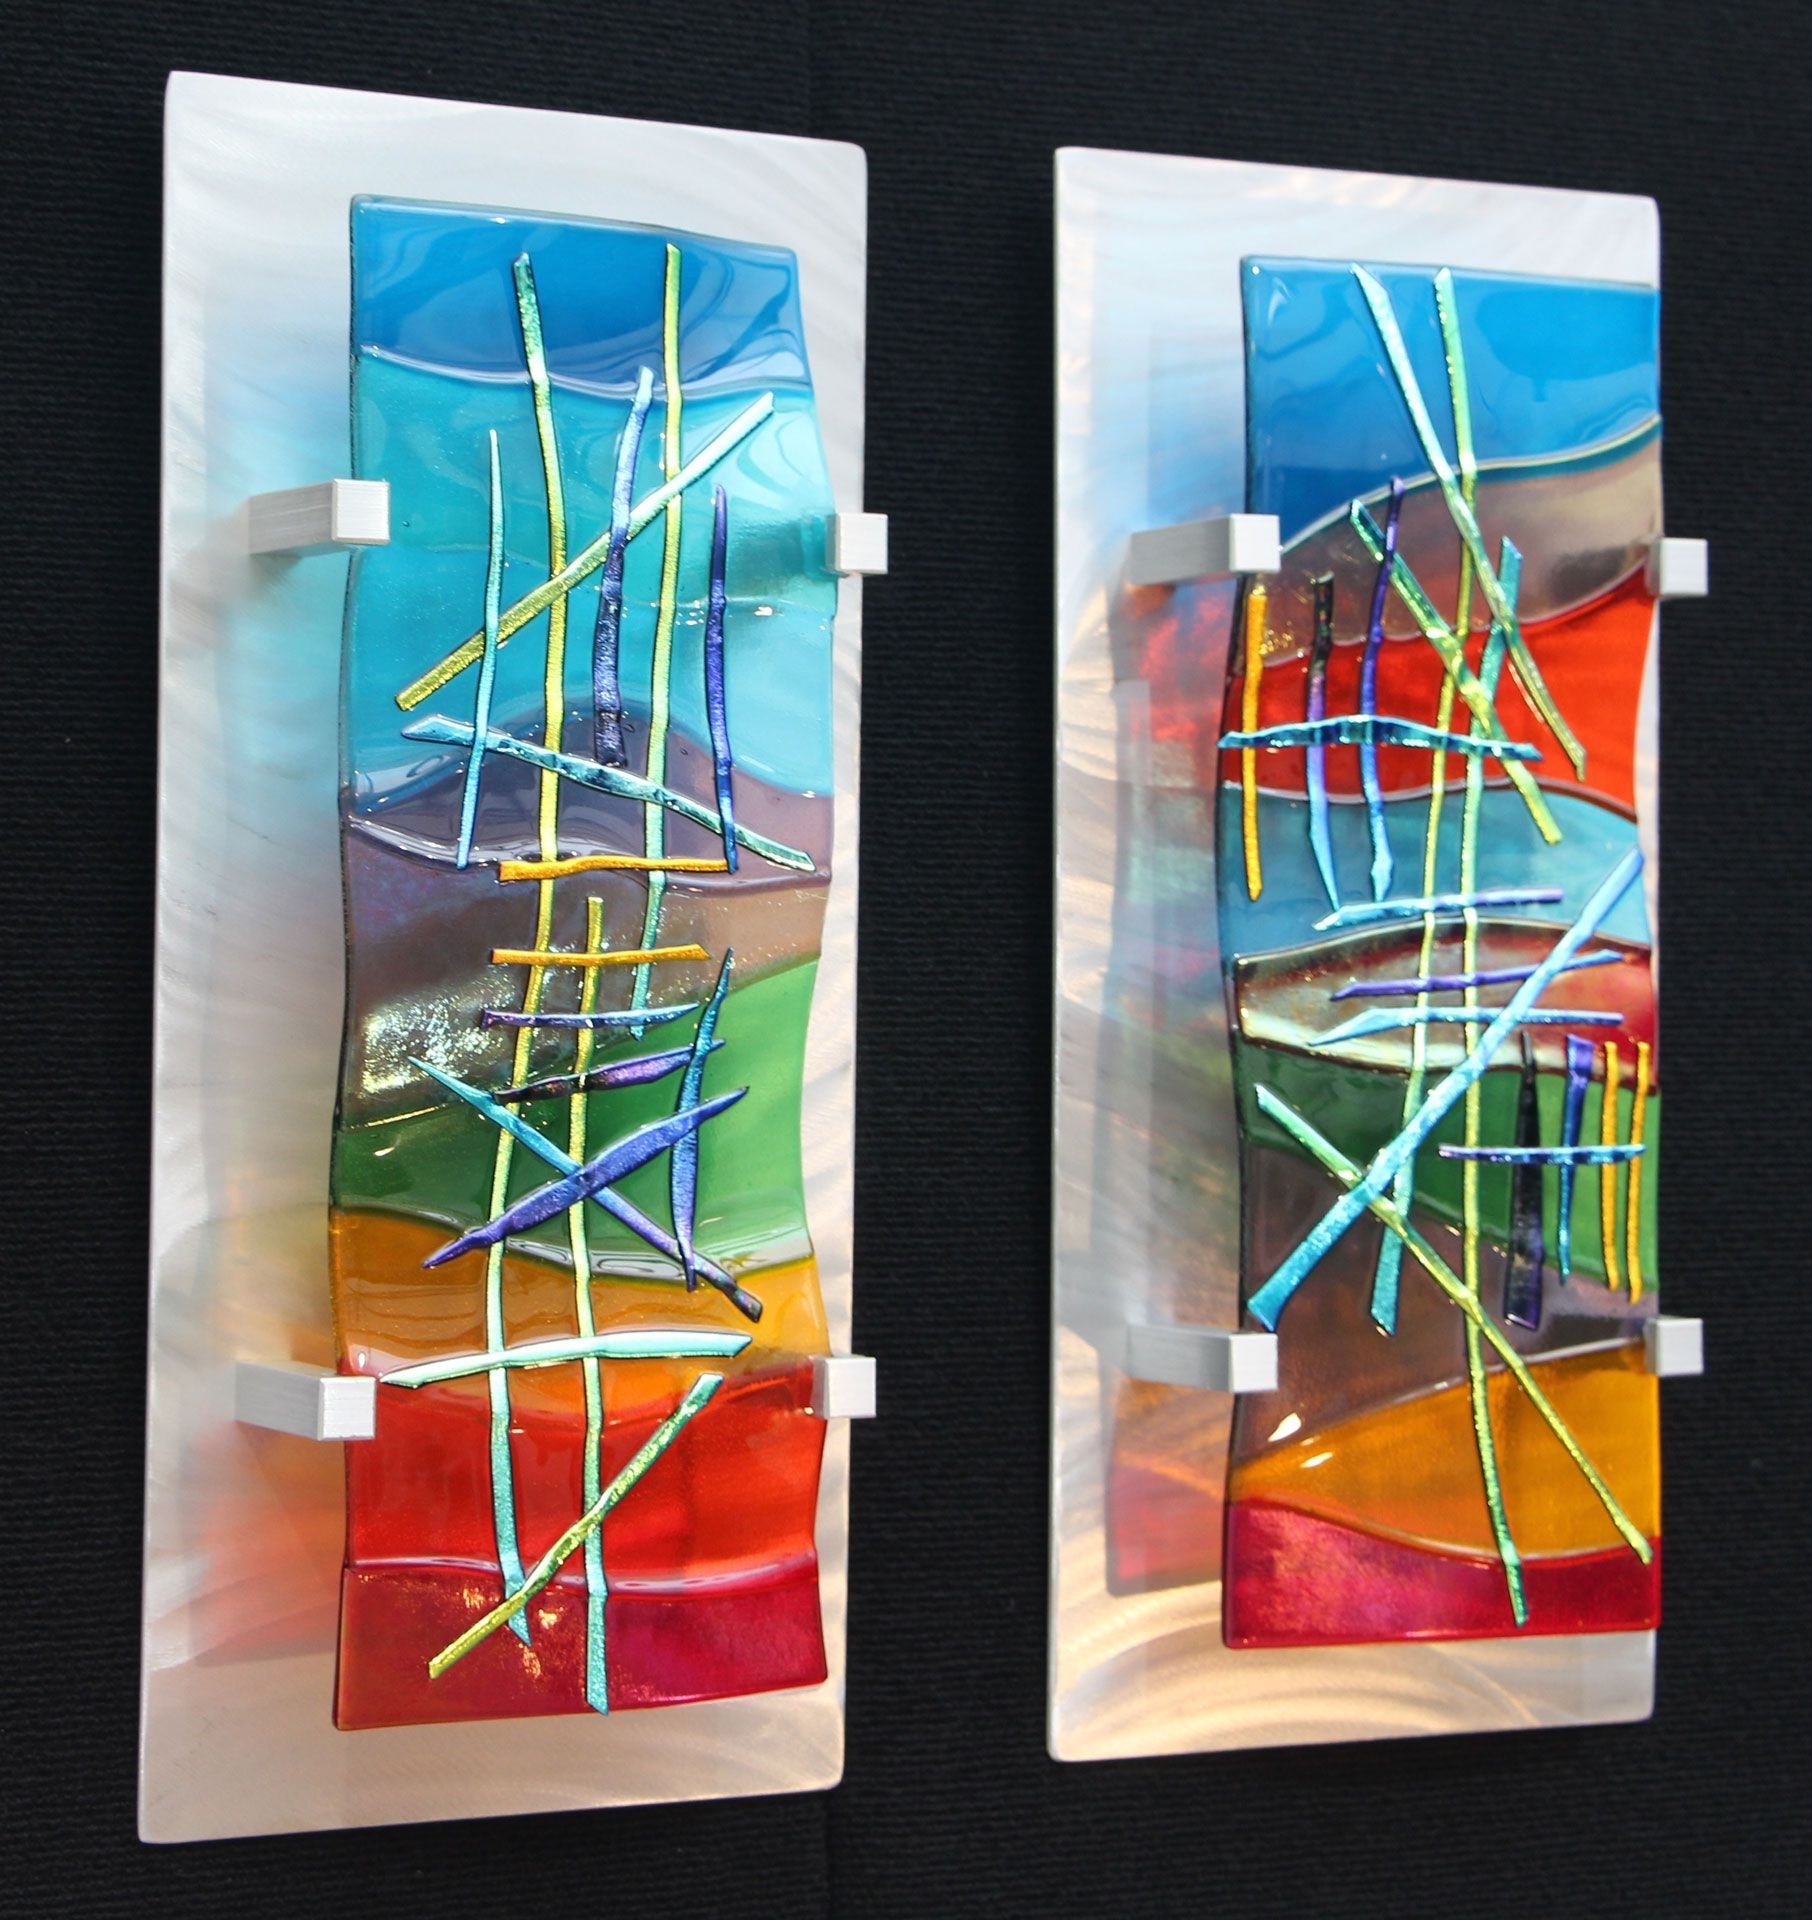 Fused Glass Wall Artfrank Thompson | Glass Ideas | Pinterest With Regard To Glass Wall Art (View 1 of 20)